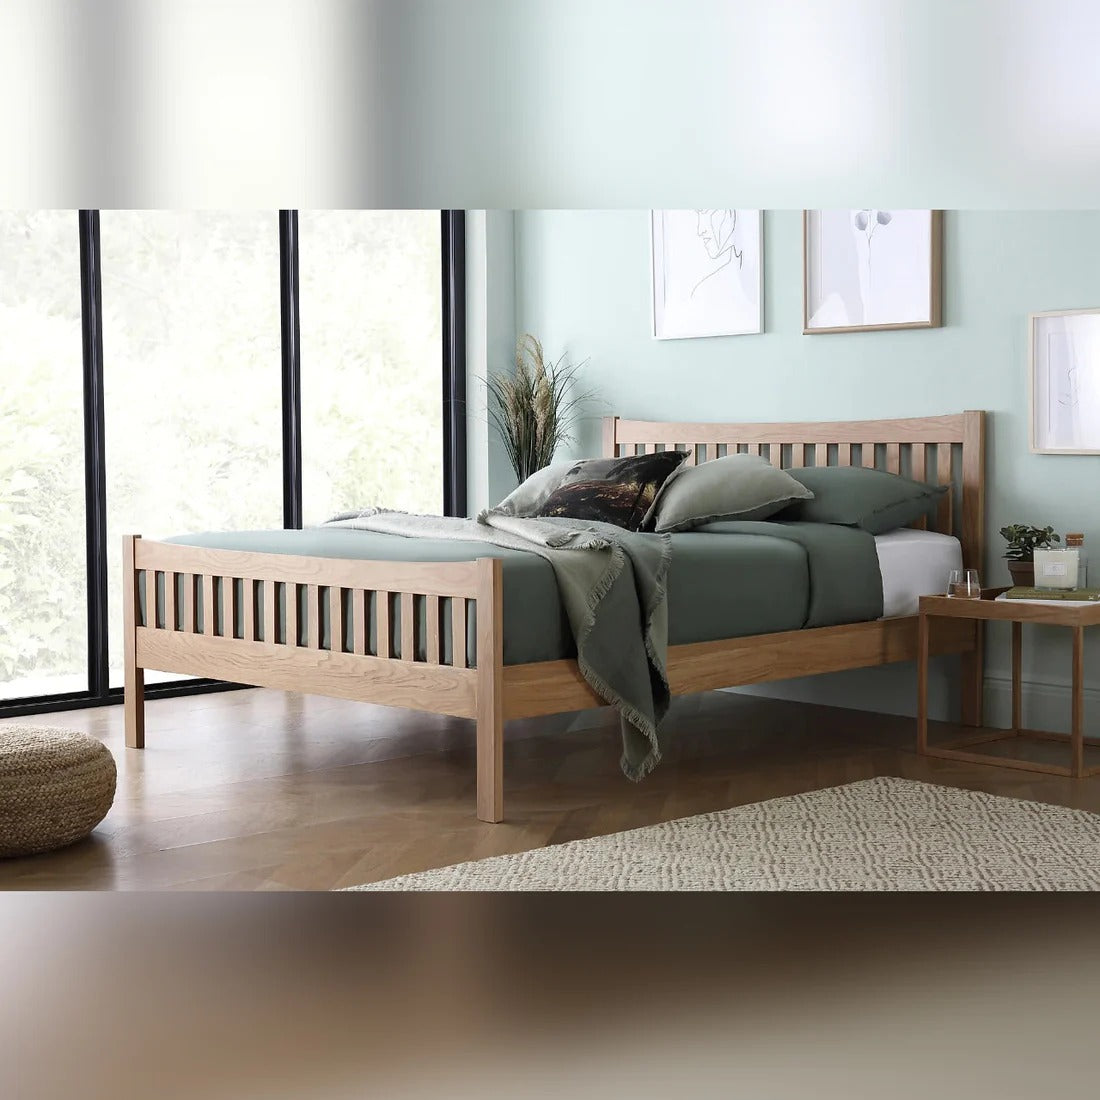 Double Bed Design, Double Bed Design Photo, Latest Double Bed Designs With Box!